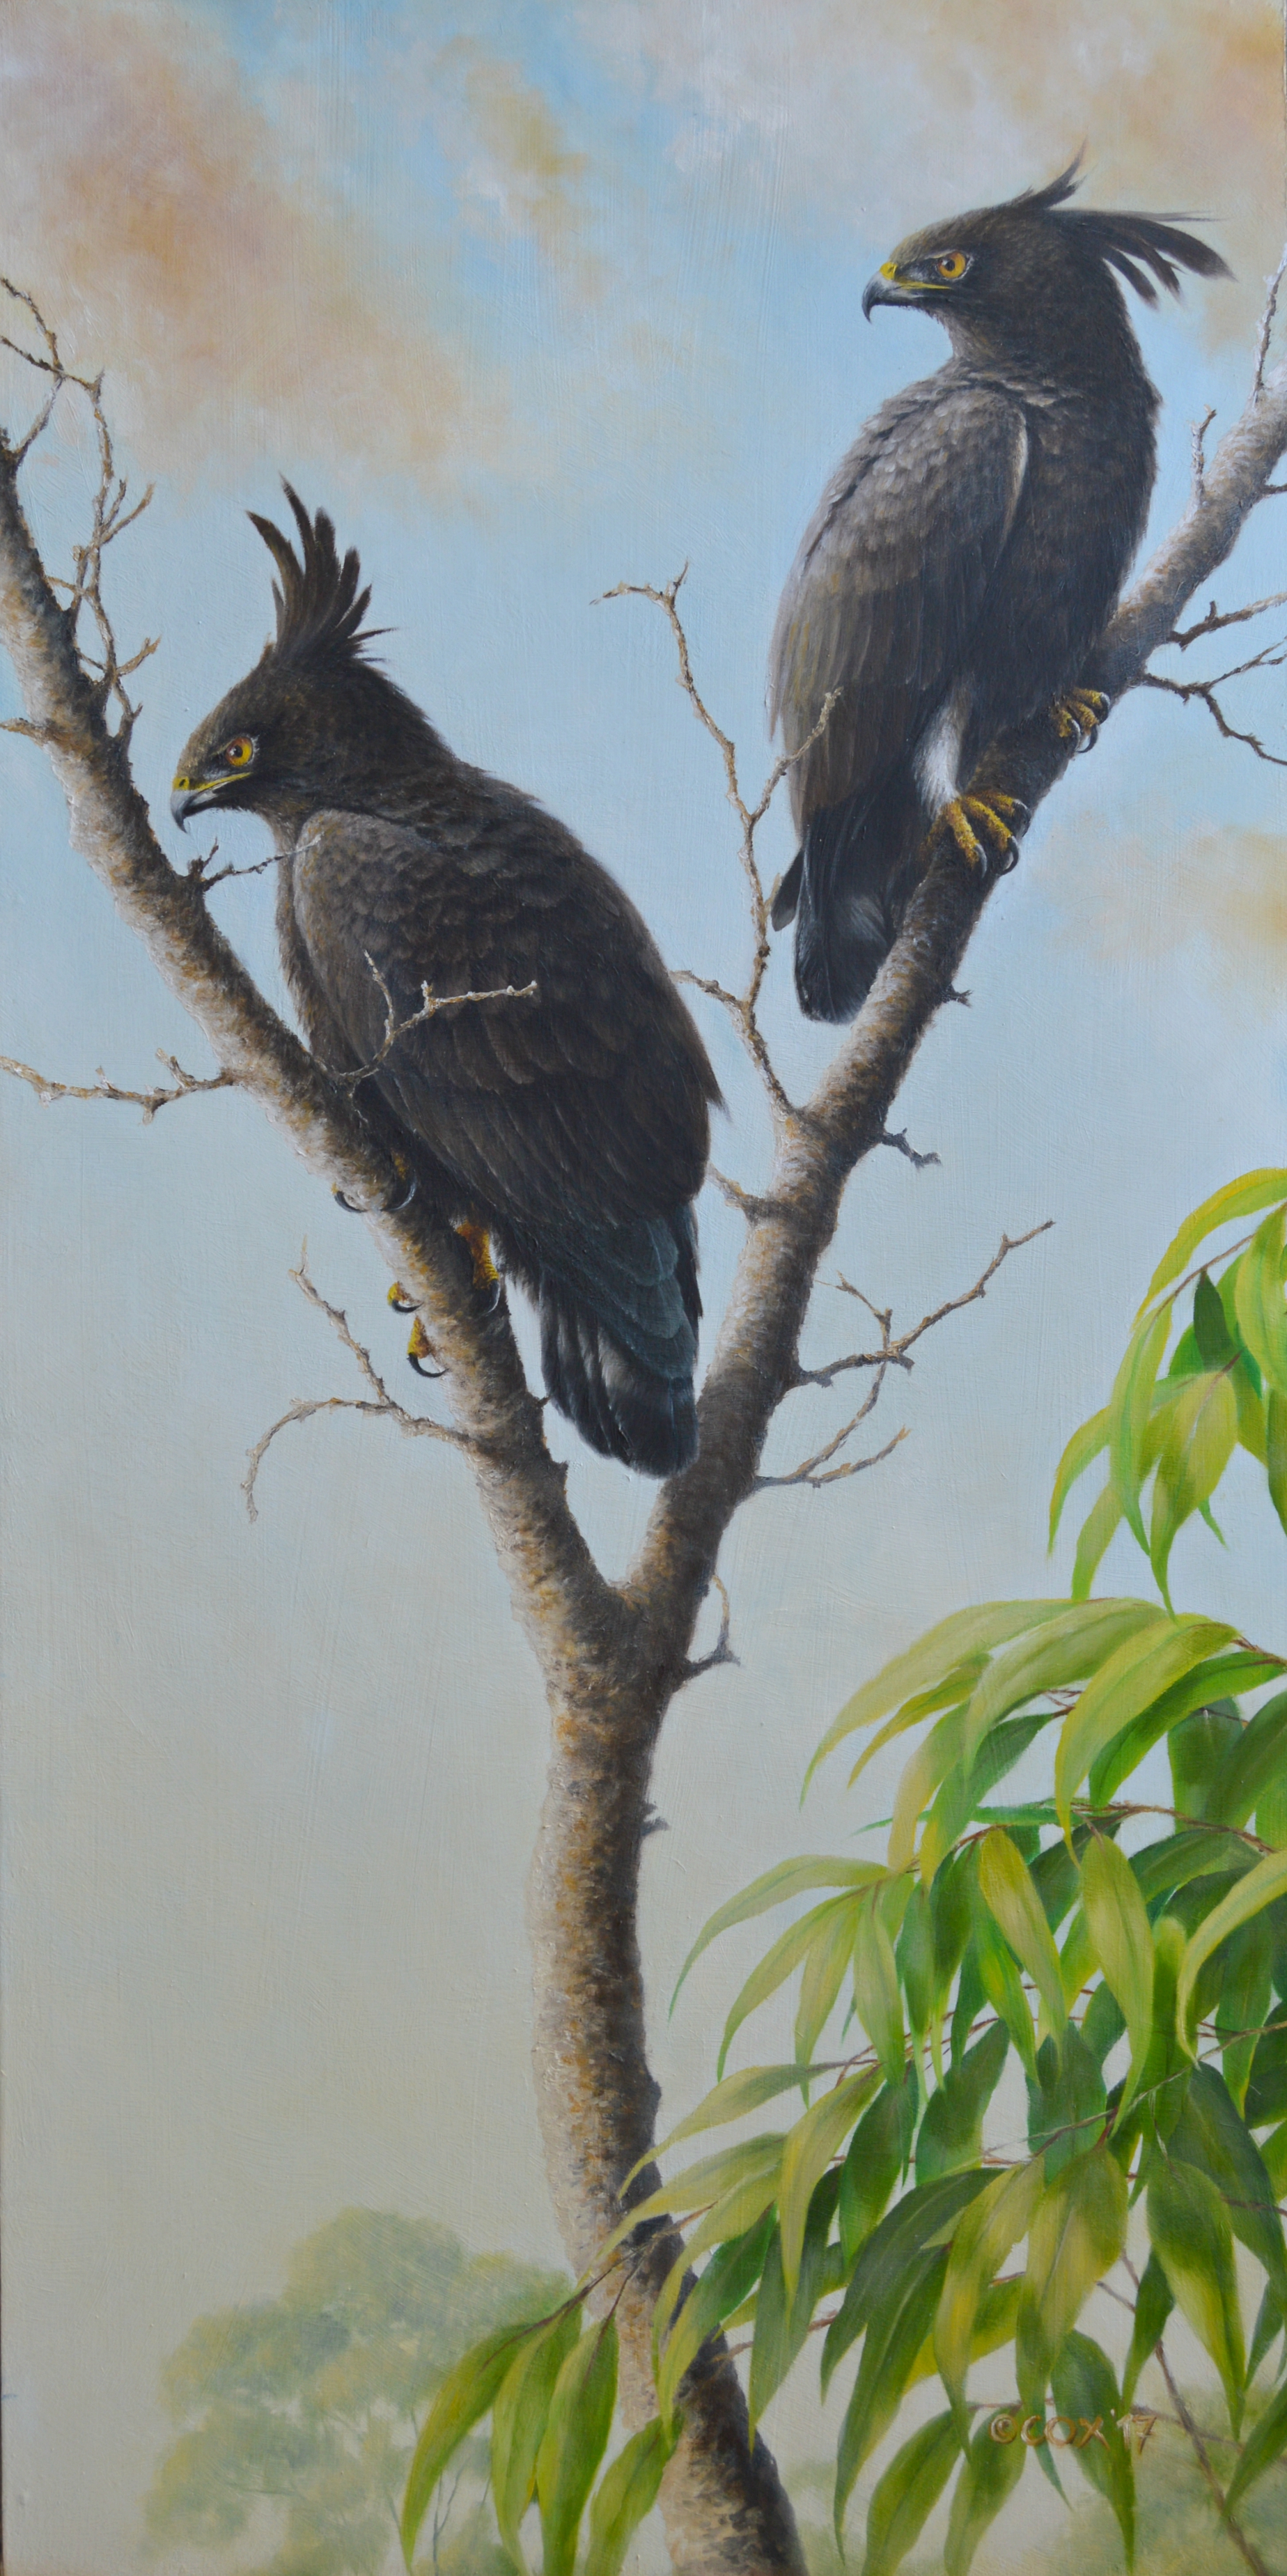 'Karura Perch' Long-crested Eagles Oil on panelboard 48x24"